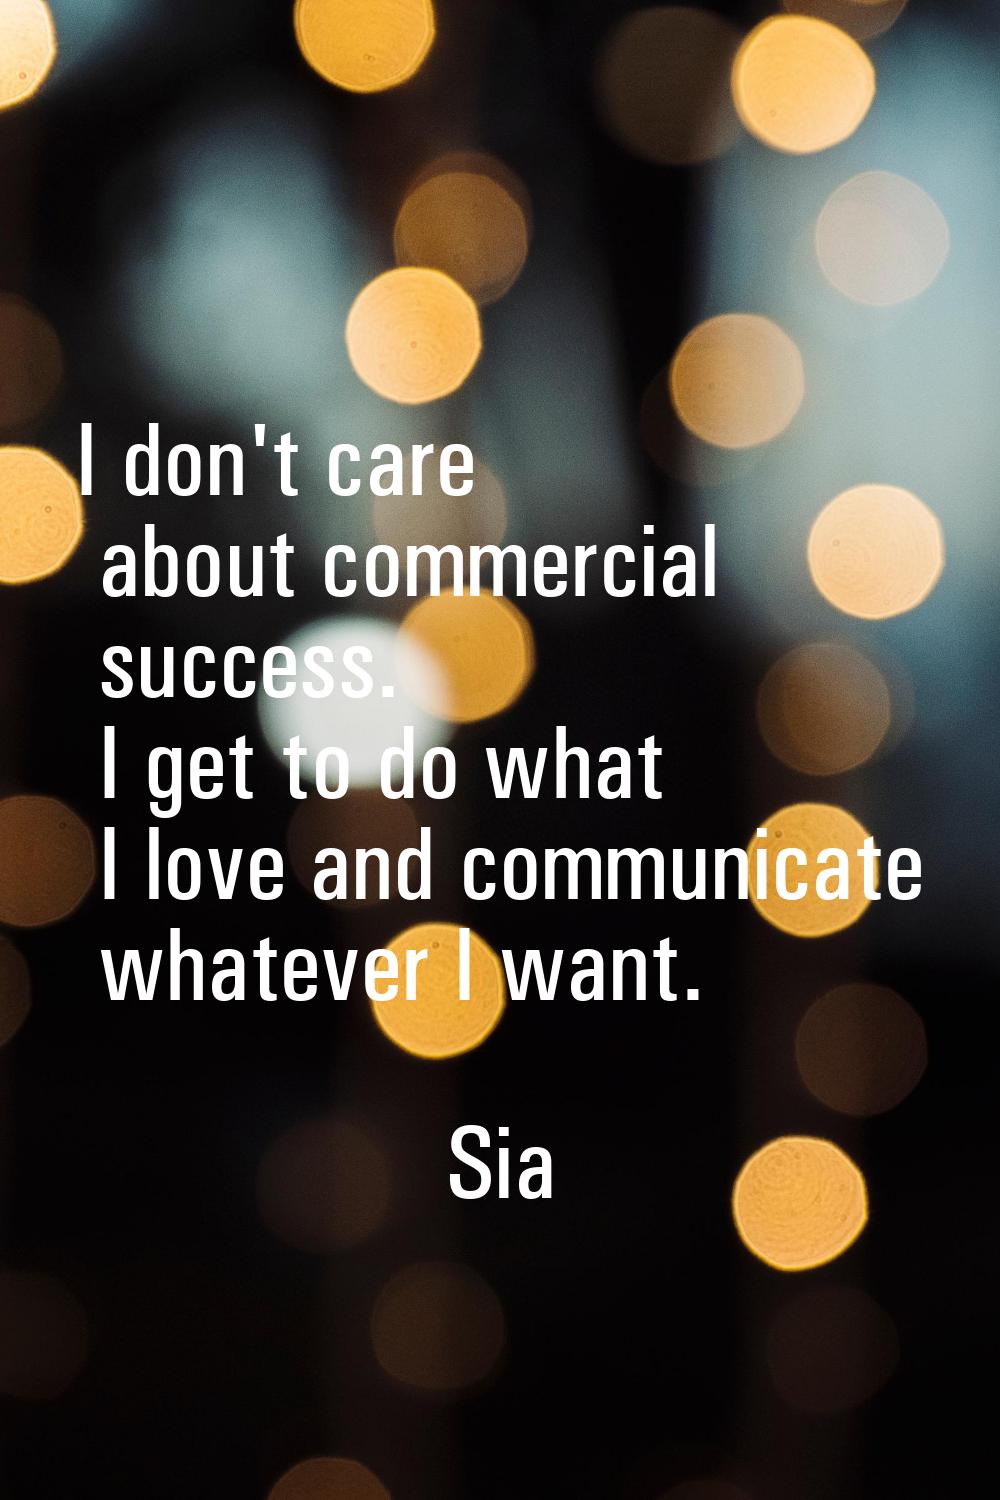 I don't care about commercial success. I get to do what I love and communicate whatever I want.